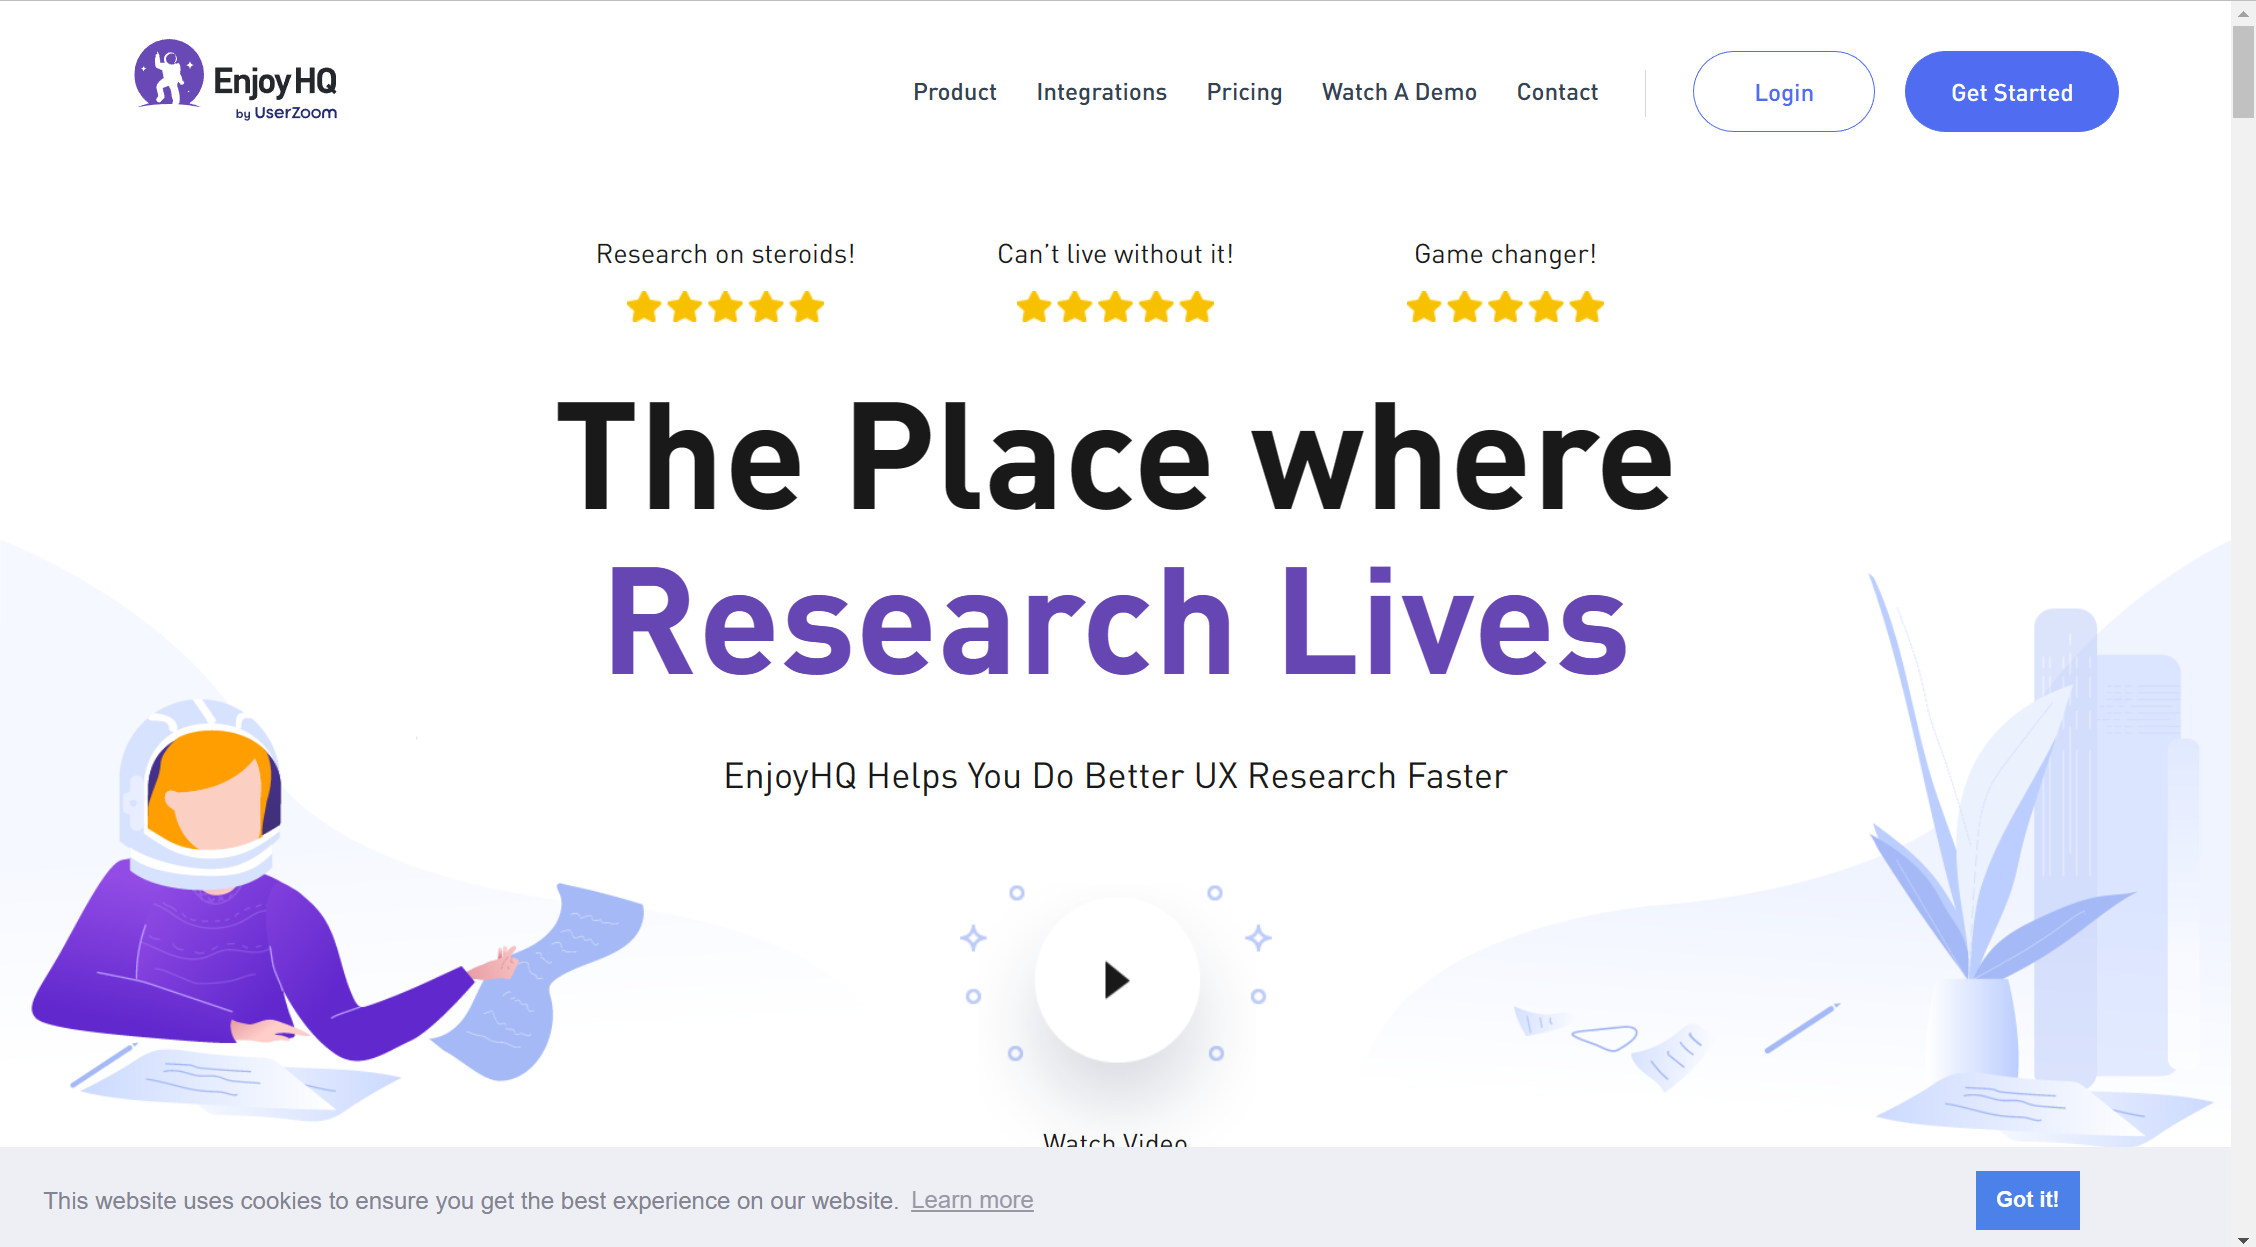 EnjoyHQ's homepage: is it a good user interview tool?